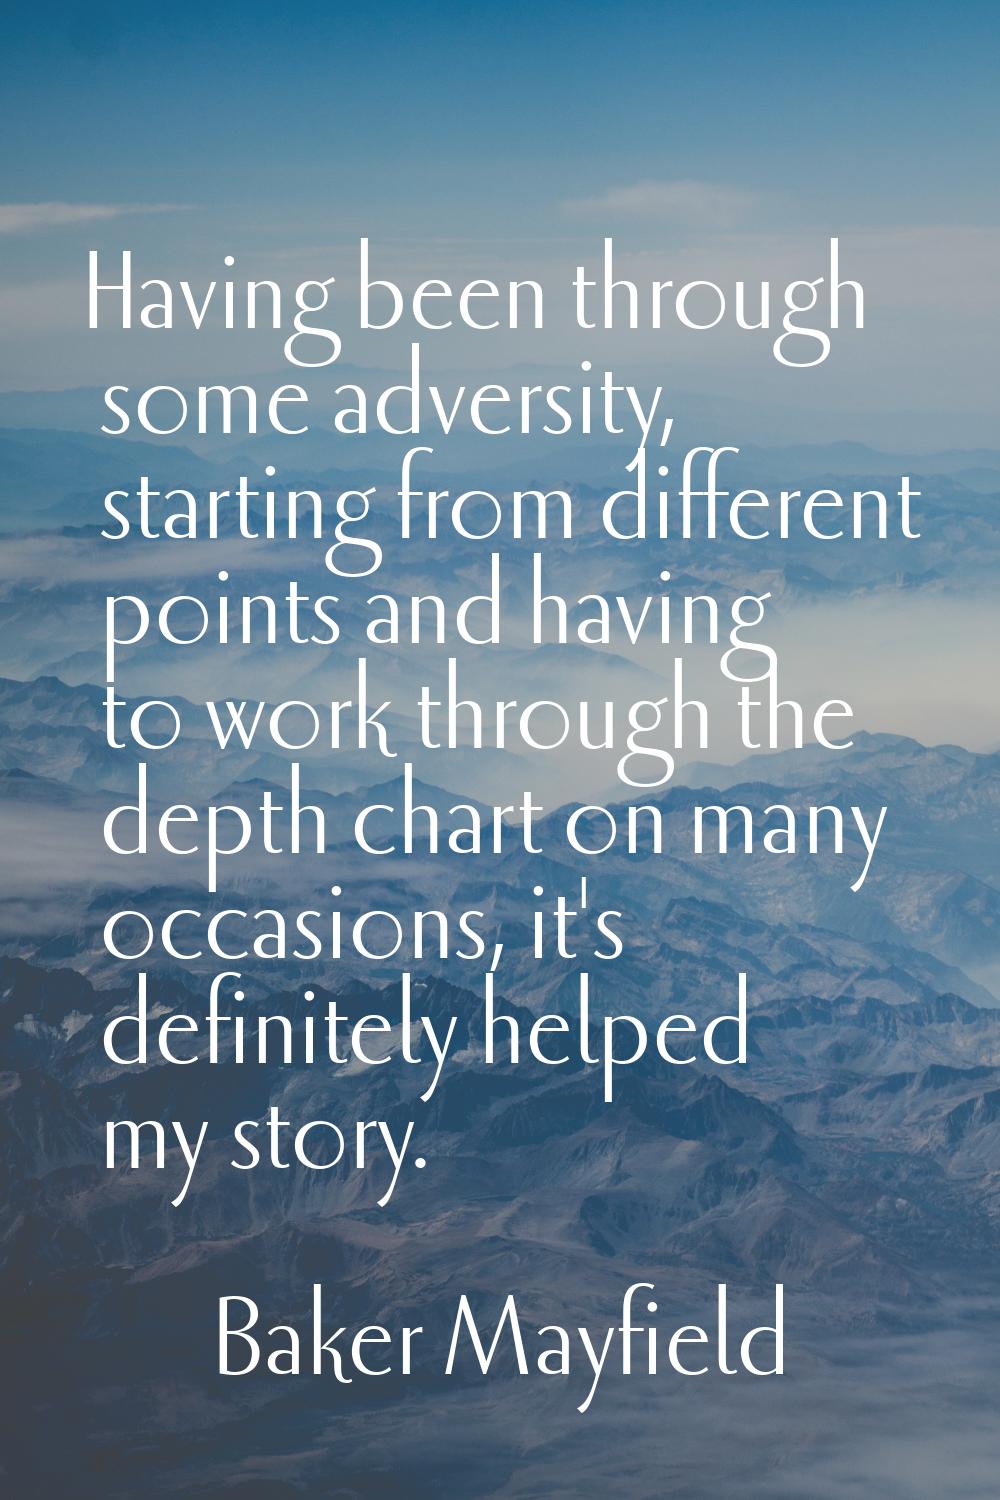 Having been through some adversity, starting from different points and having to work through the d